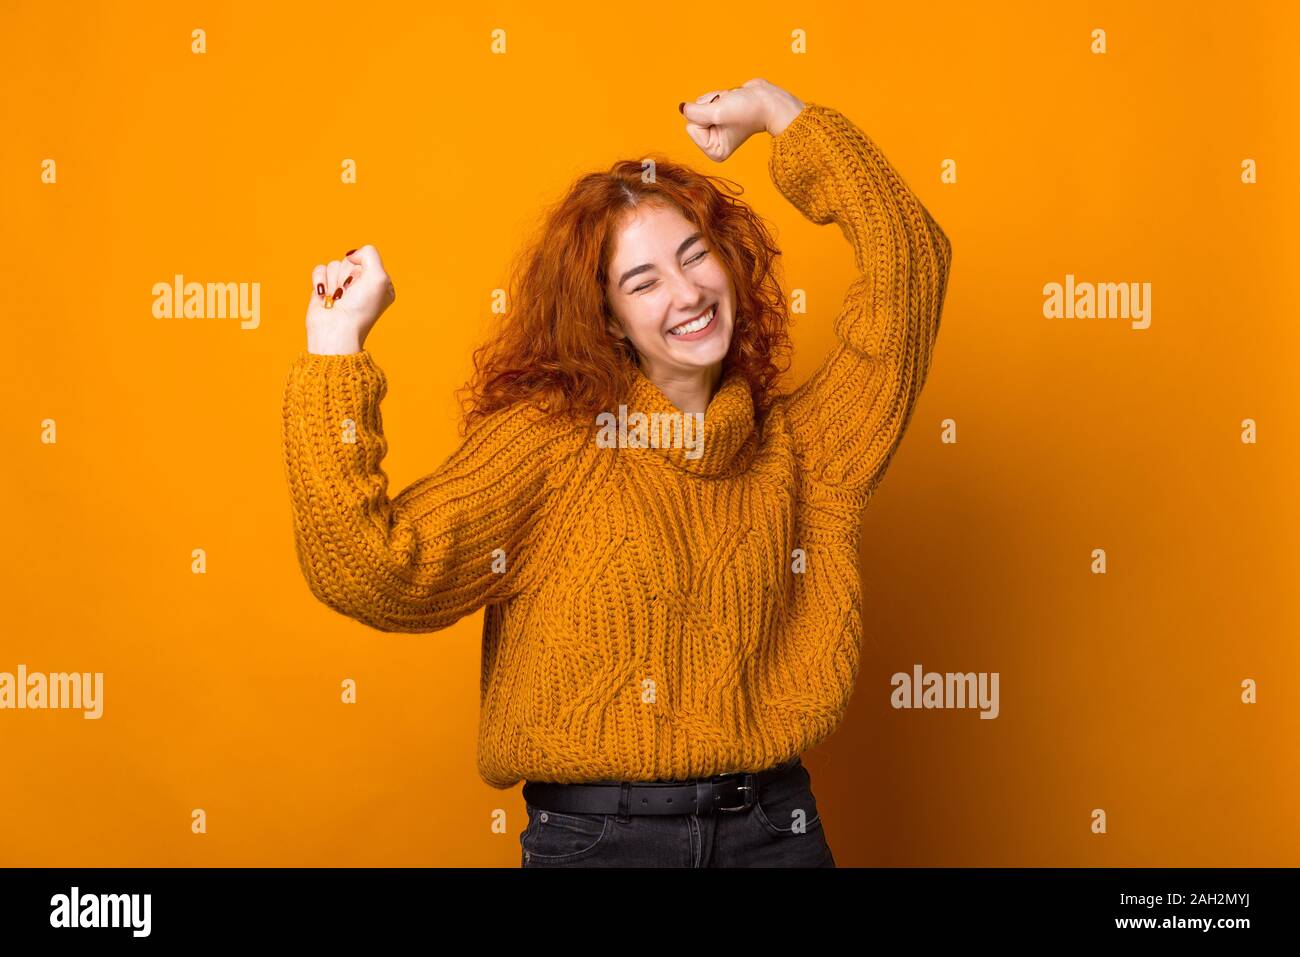 Photo of ginger young woman, having fun and celebration with rised hands, over isolated background Stock Photo